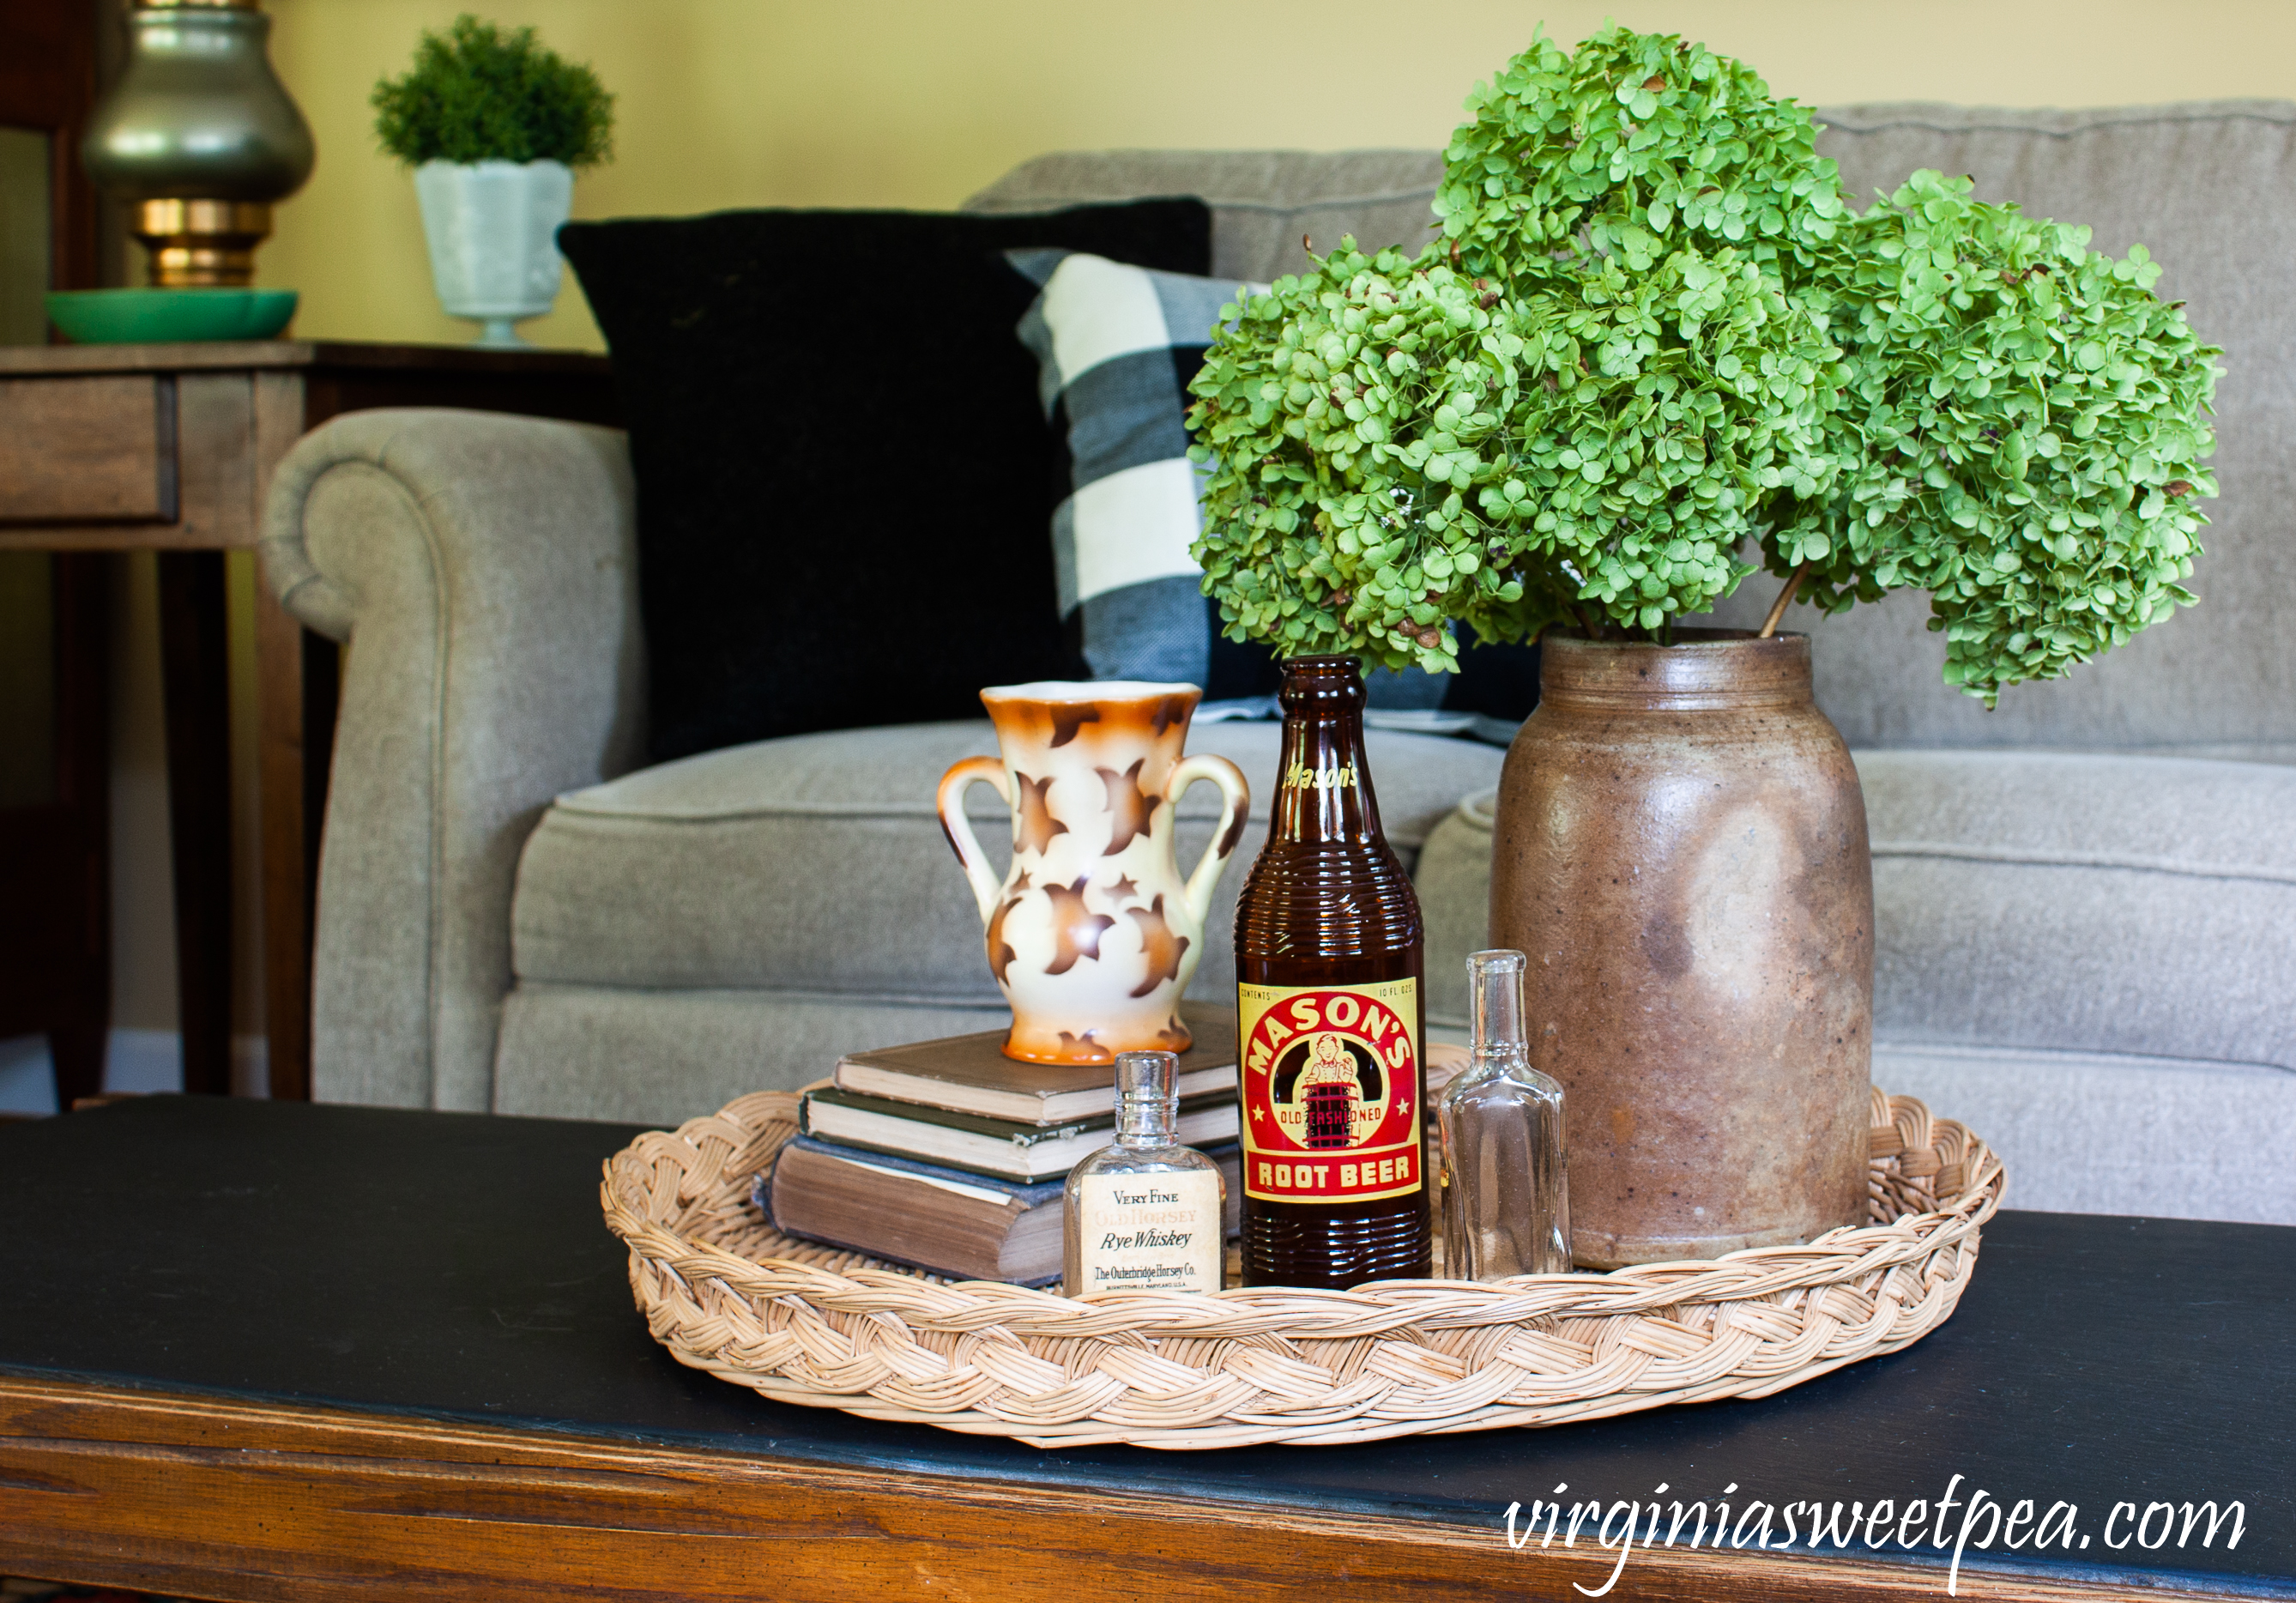 Early fall coffee table vignette with Hydrangeas in an antique crock, vintage bottles books, and a Czechoslovakian vase.